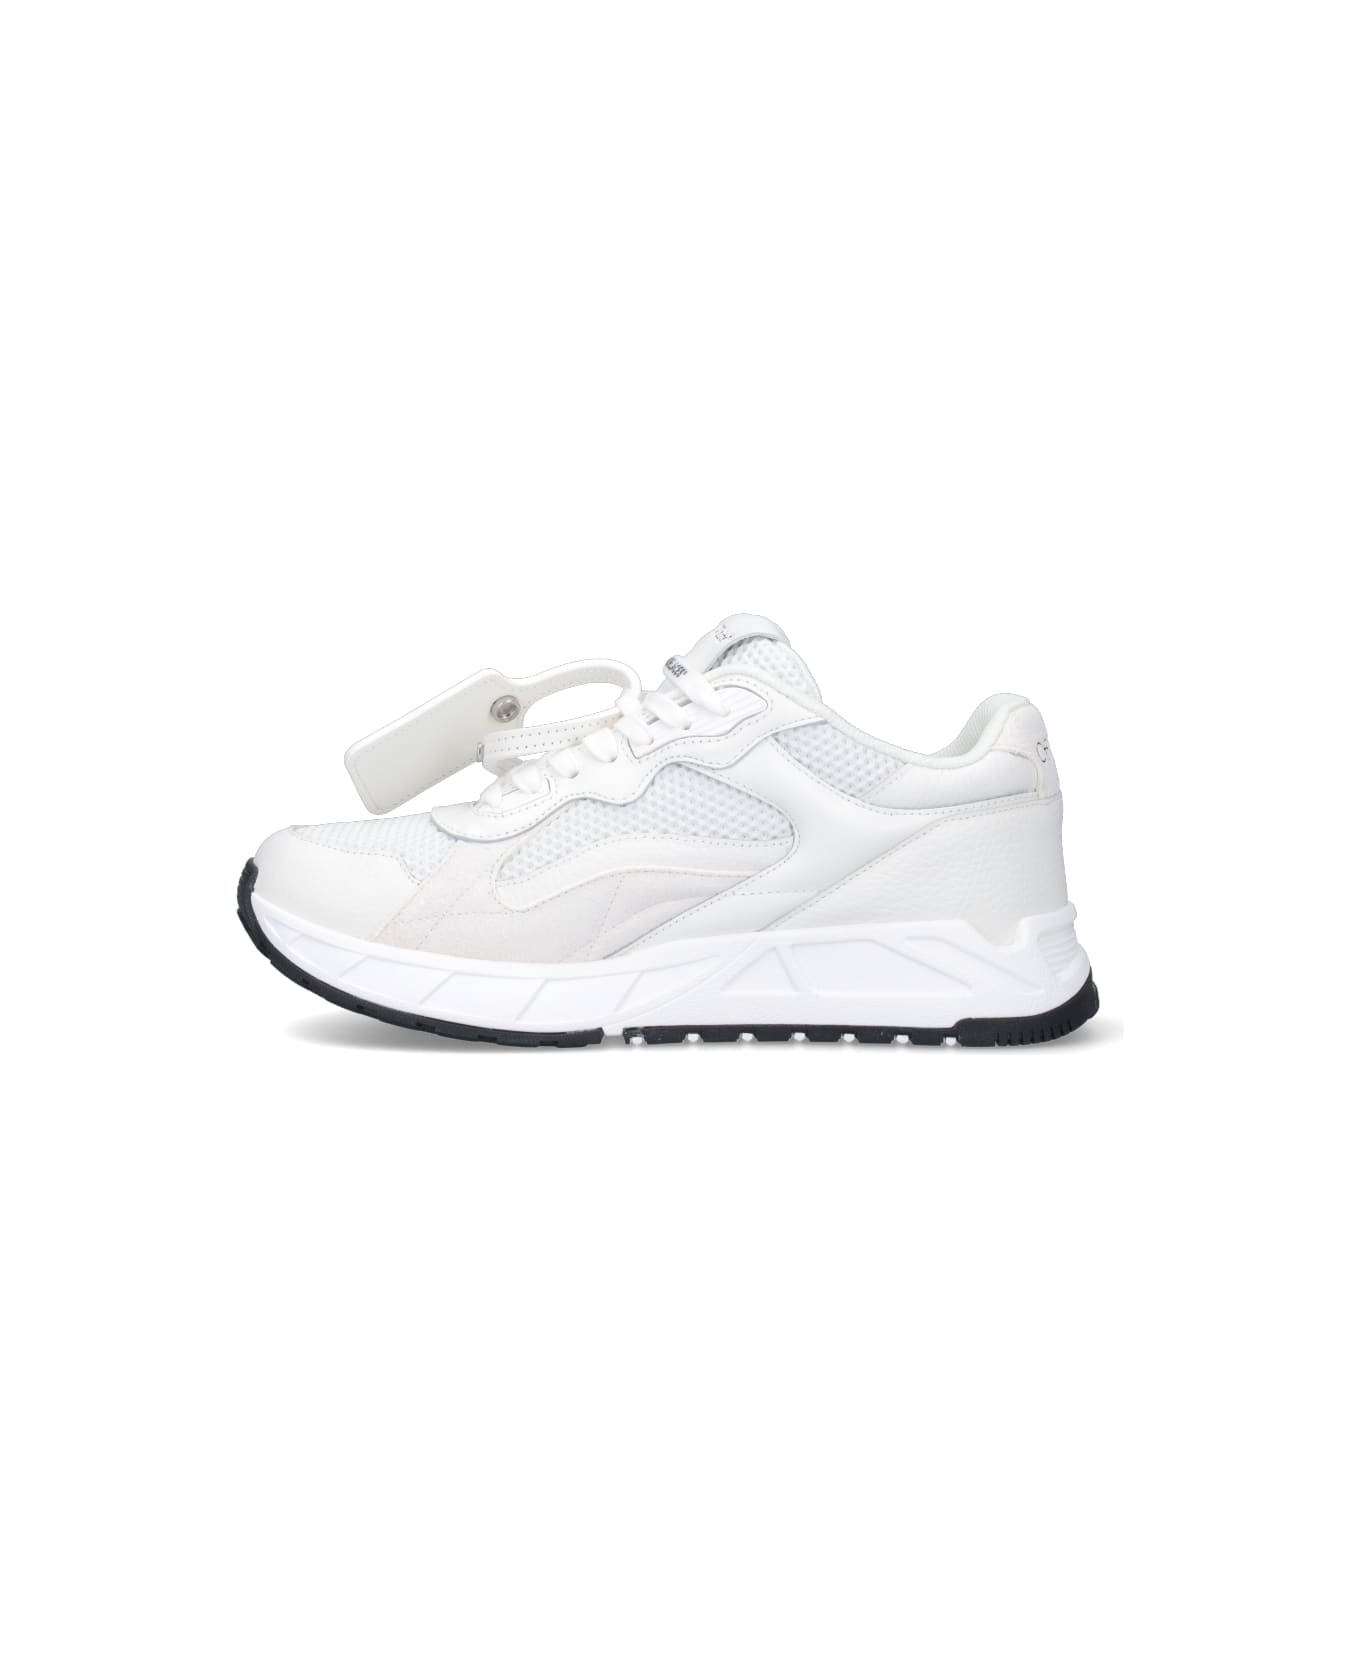 Off-White Kick Off Lace-up Sneakers - White White